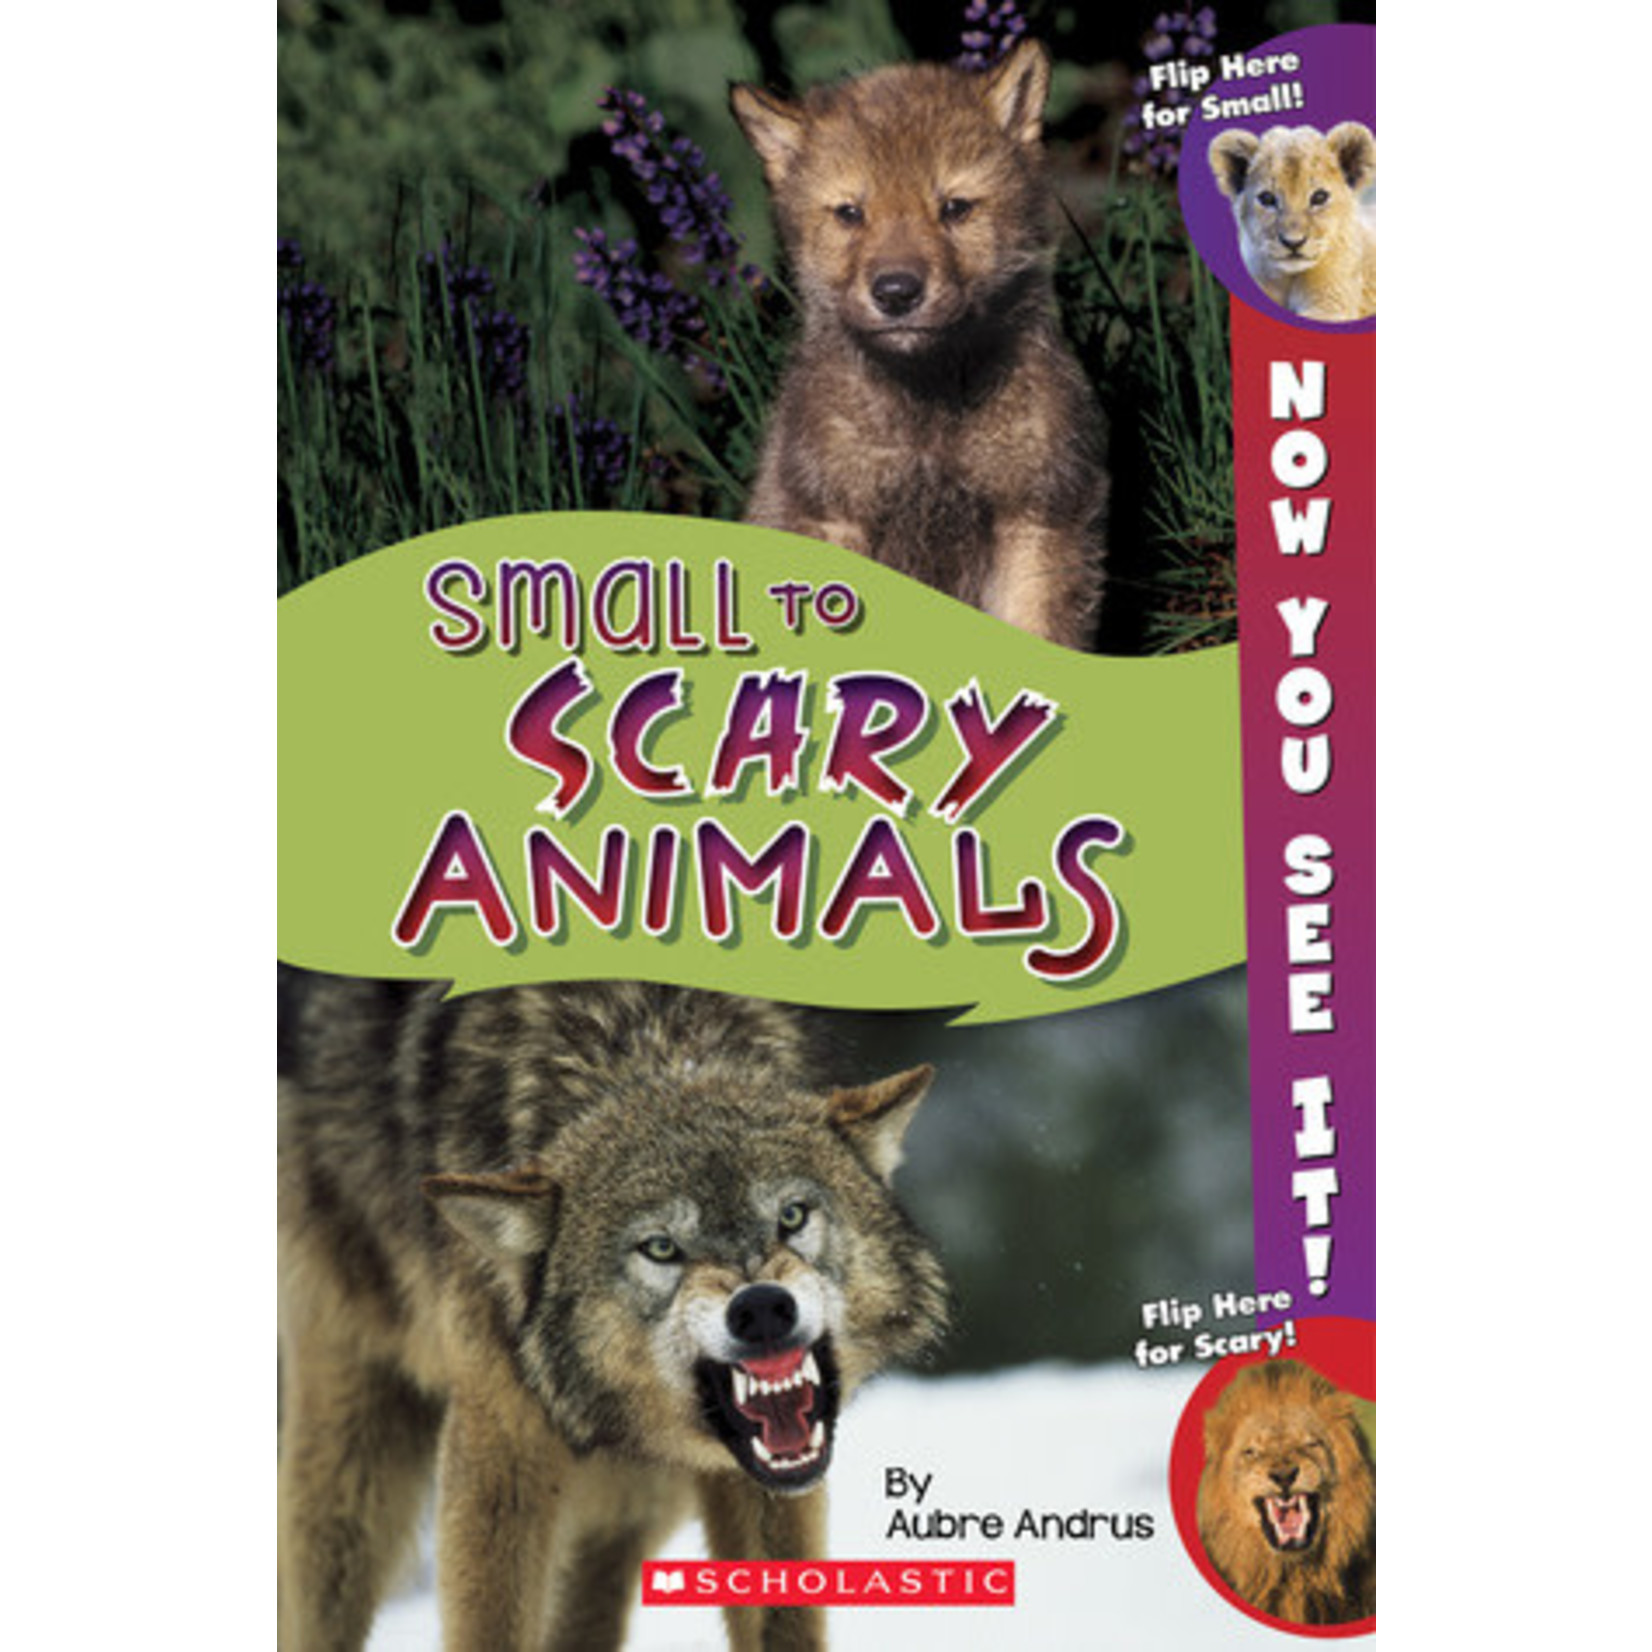 Small to Scary Animals - Now You See It